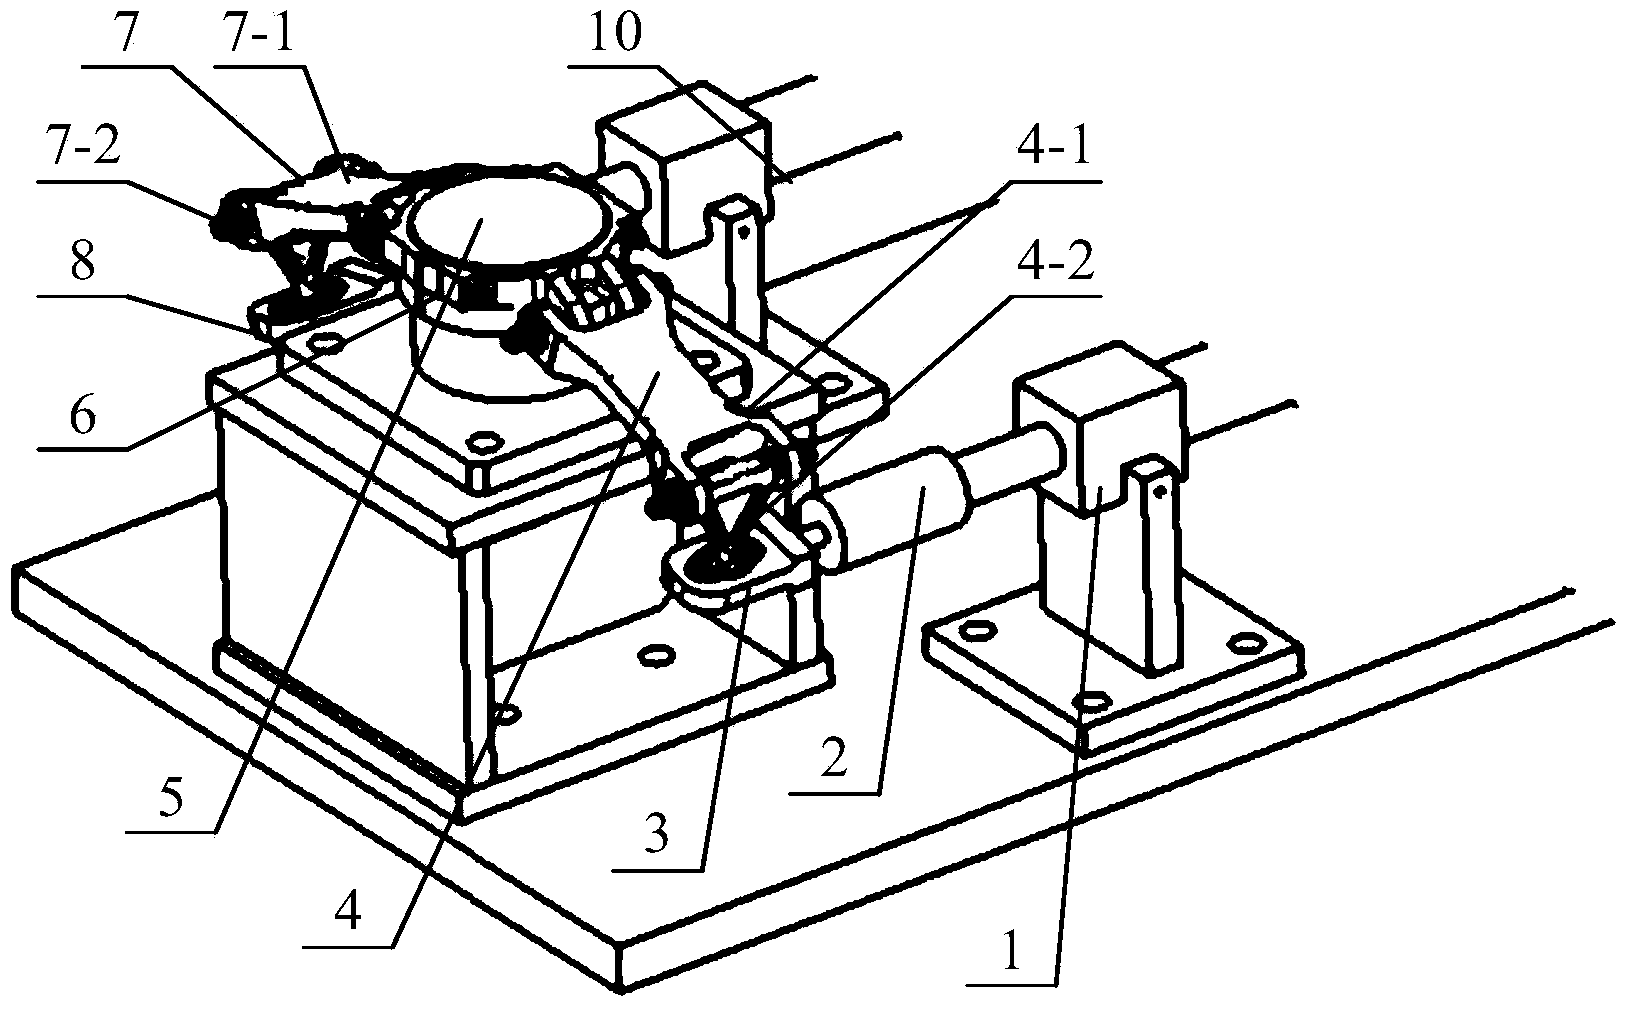 Fatigue test device for torque arm assembly